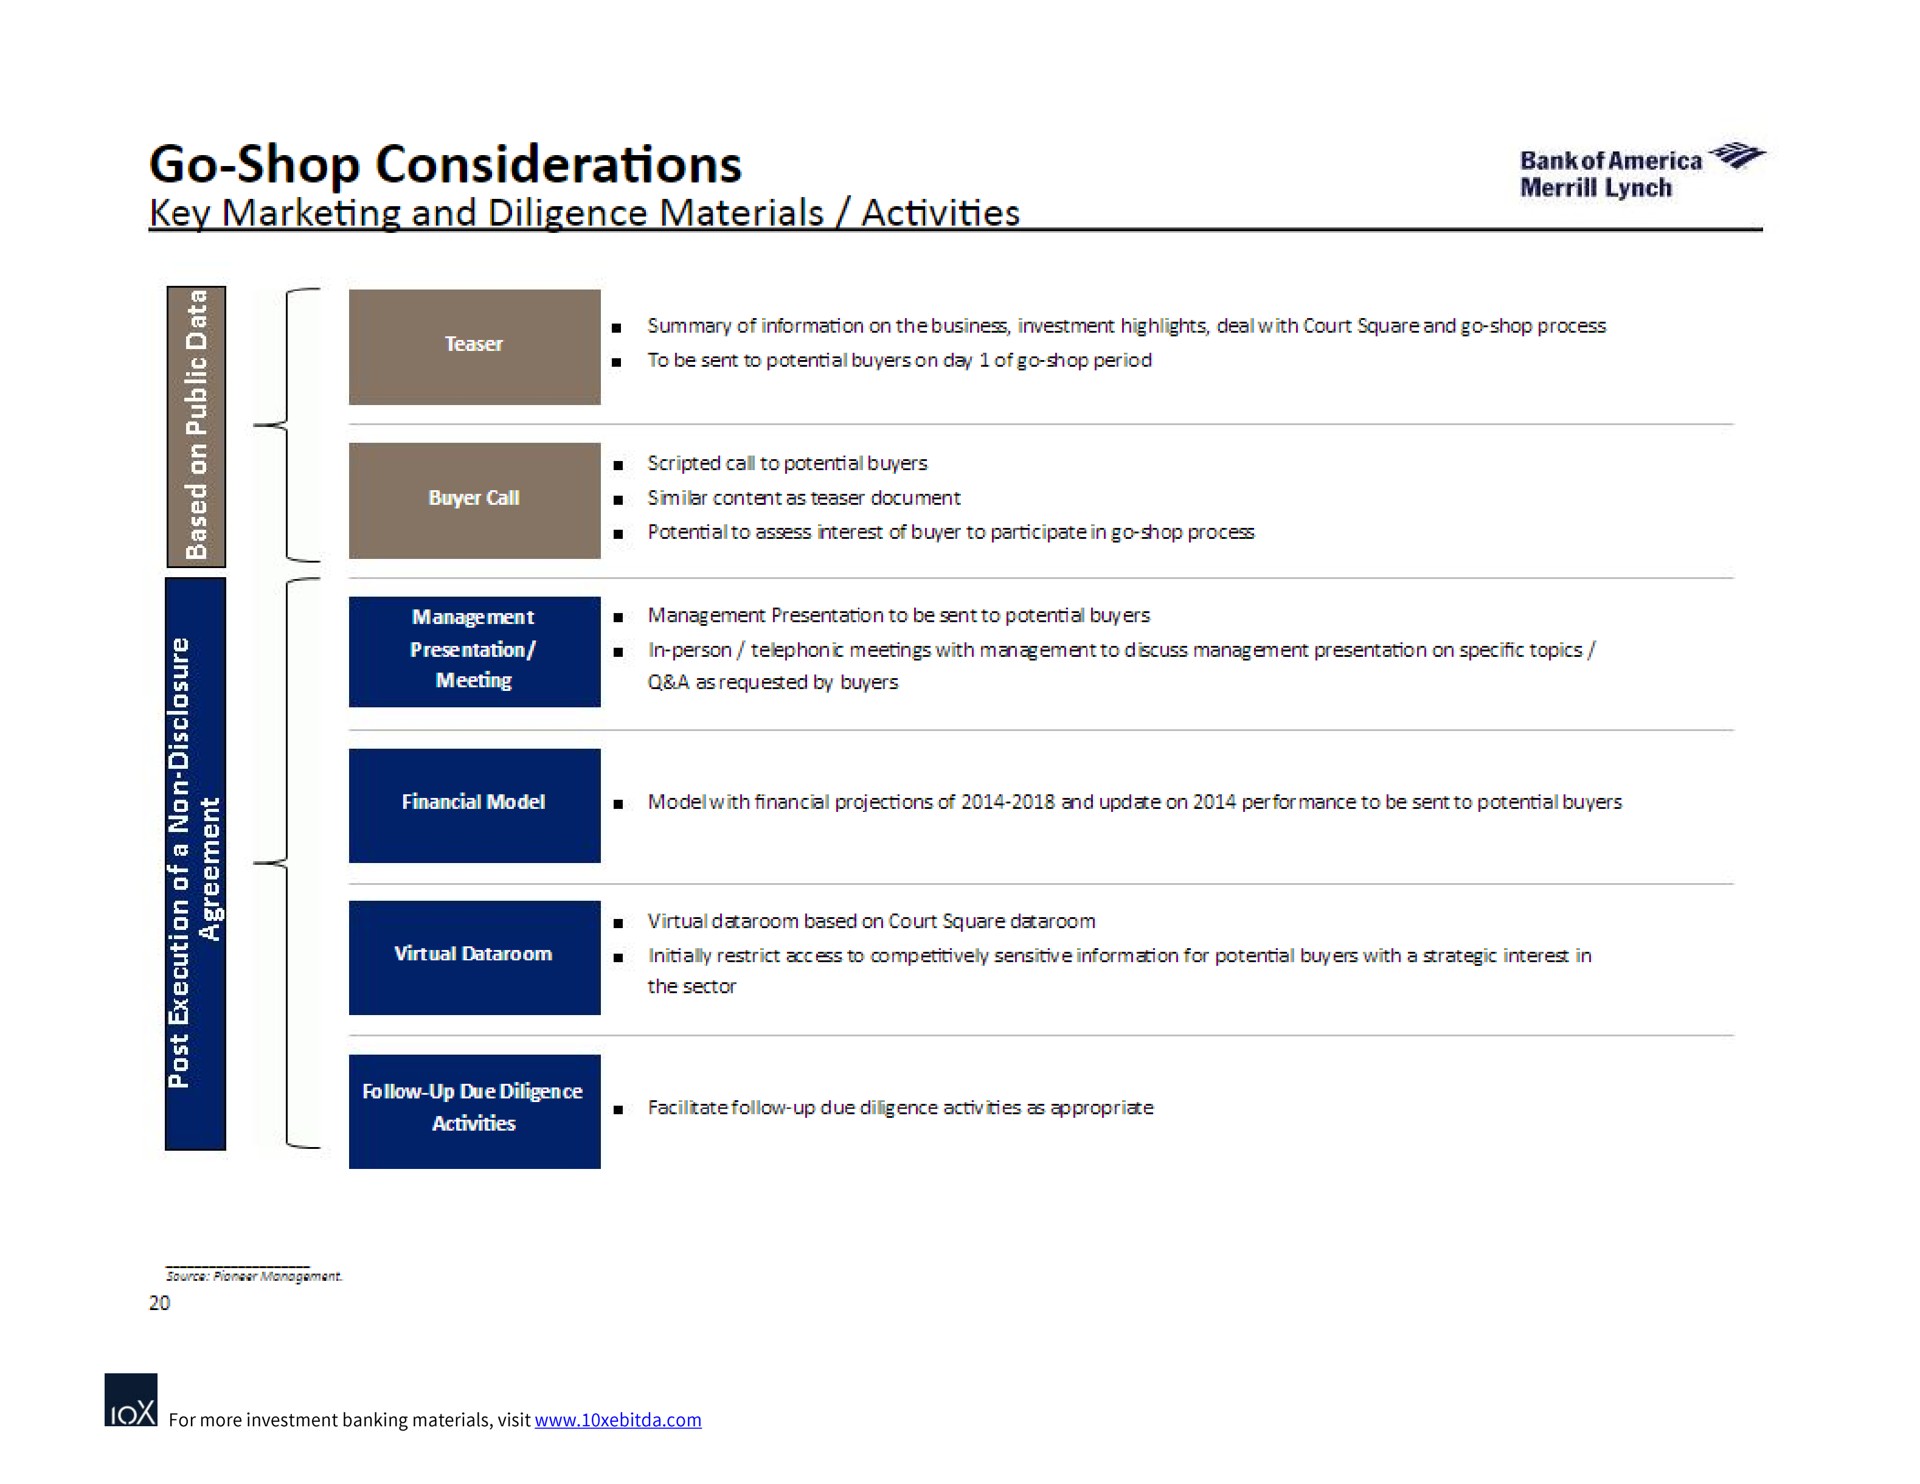 go shop considerations key marketing and diligence materials activities | Bank of America